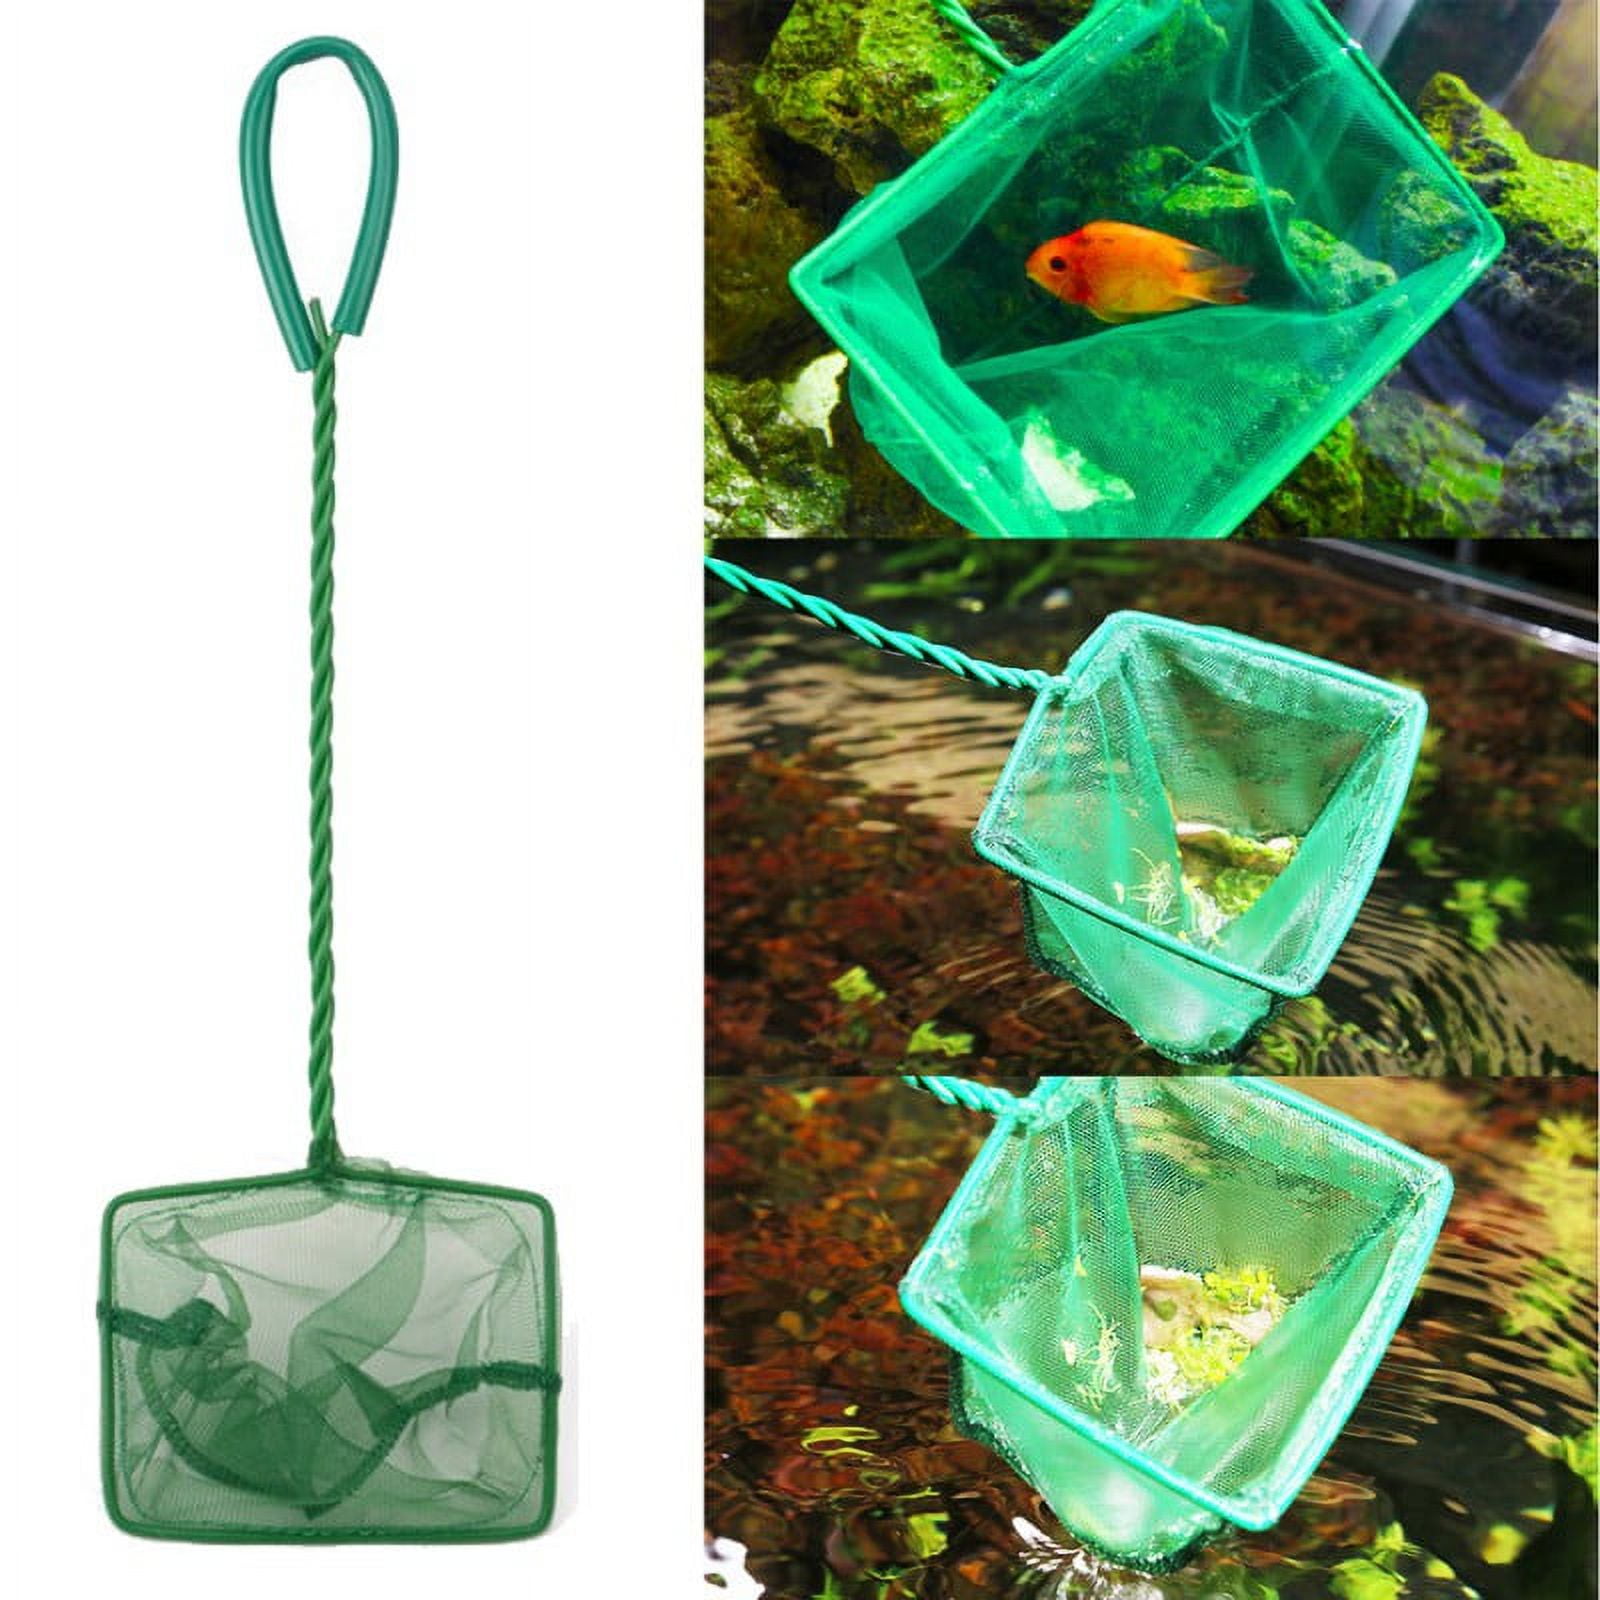 Fish Net for Fish Tank - Mesh Scooper with Extendable Handle up to